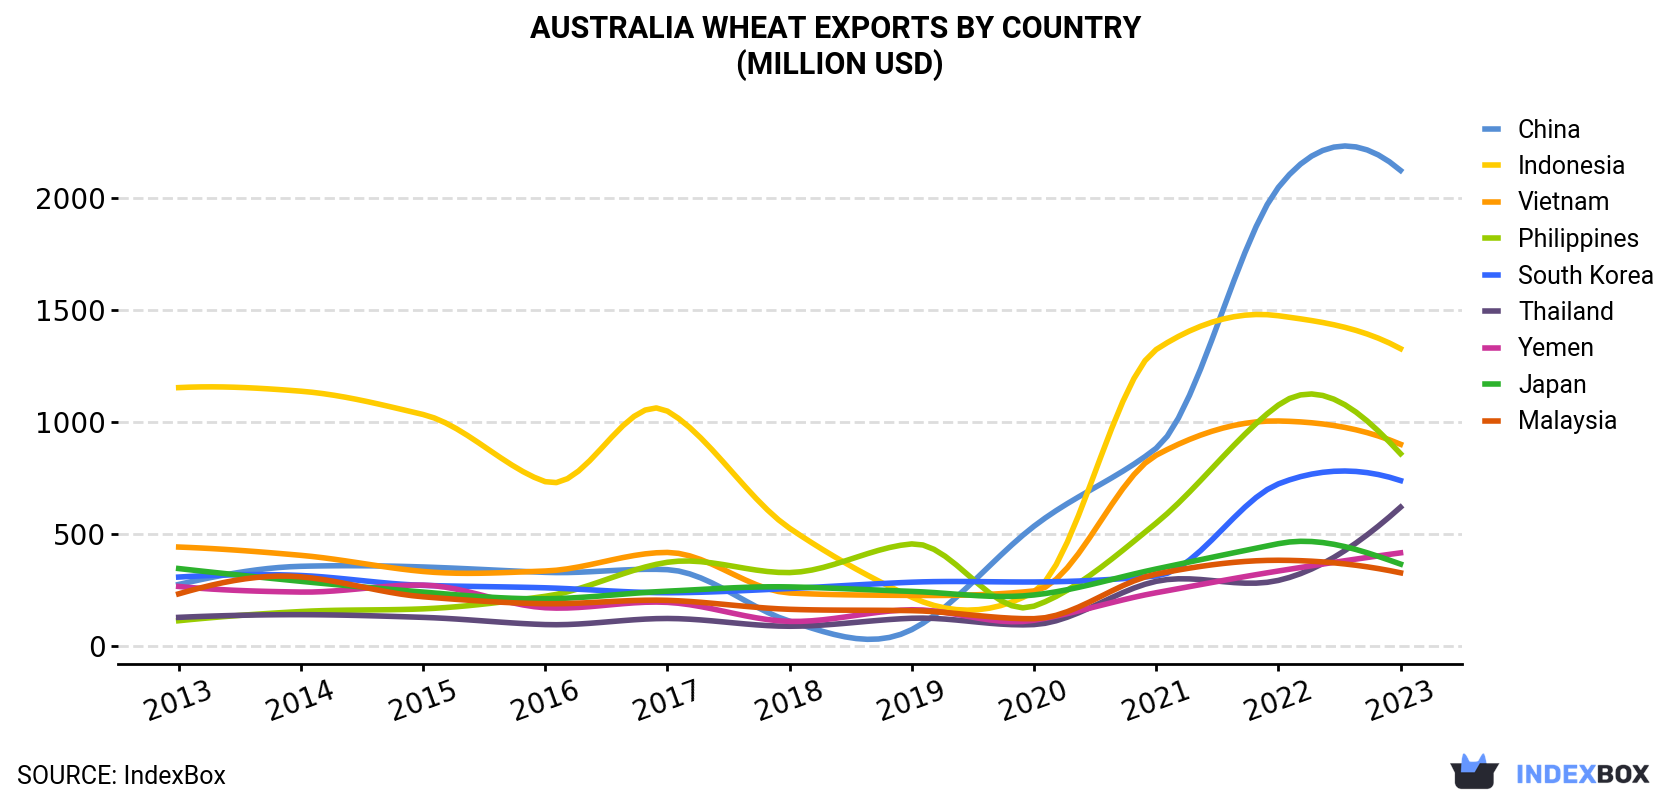 Australia Wheat Exports By Country (Million USD)